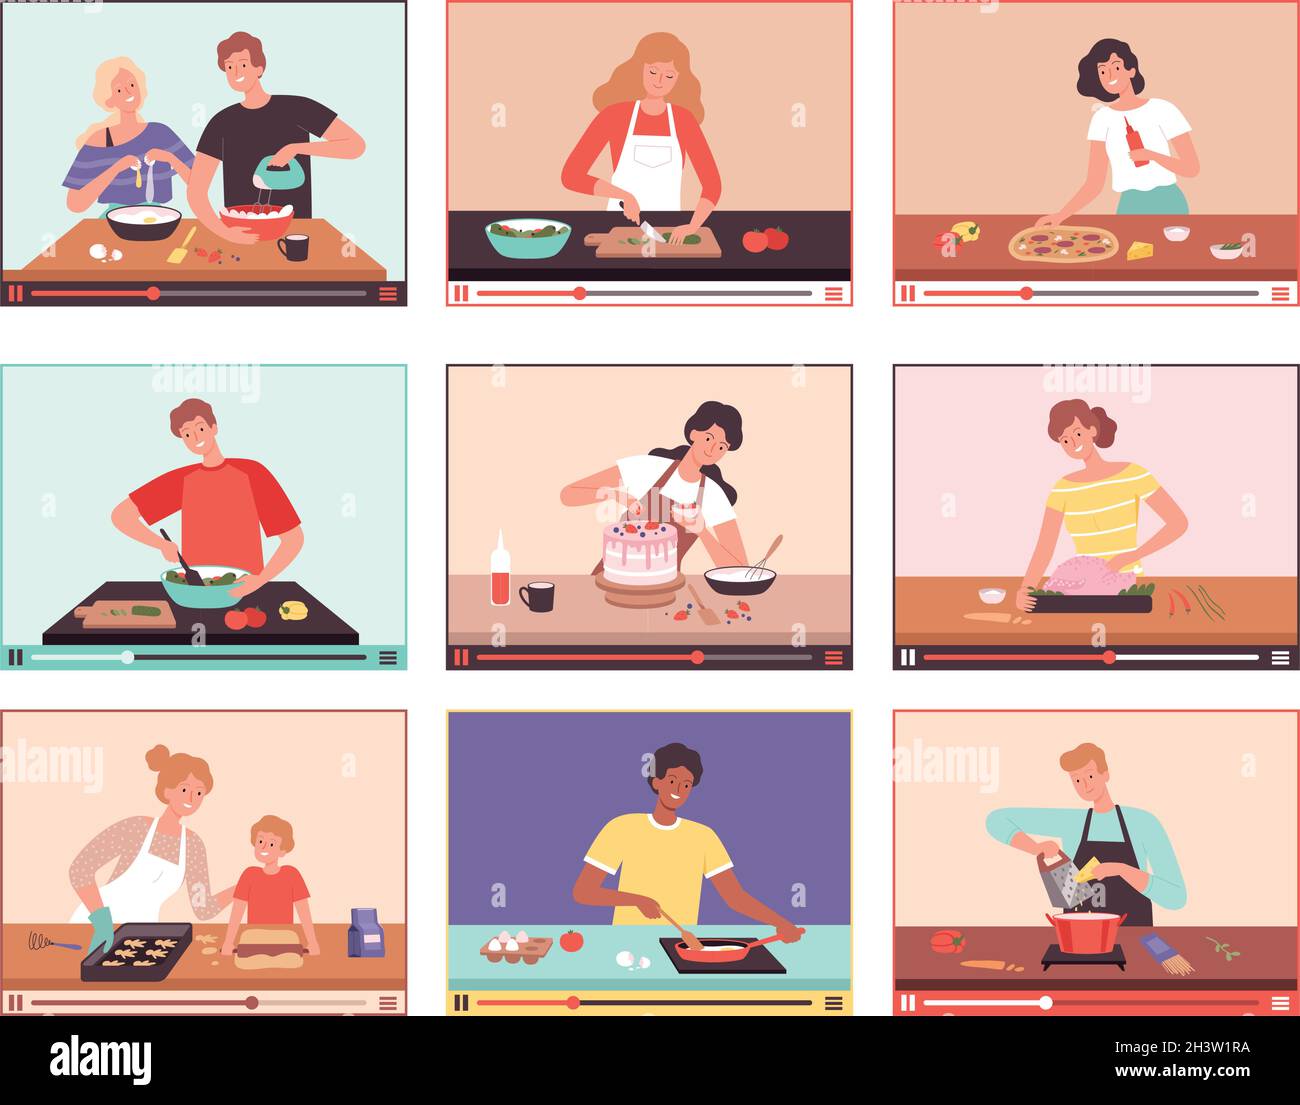 Digital culinary. Food bloggers preparing products demonstration cooking processes on tablet smartphone screen personal culinary vector concept Stock Vector